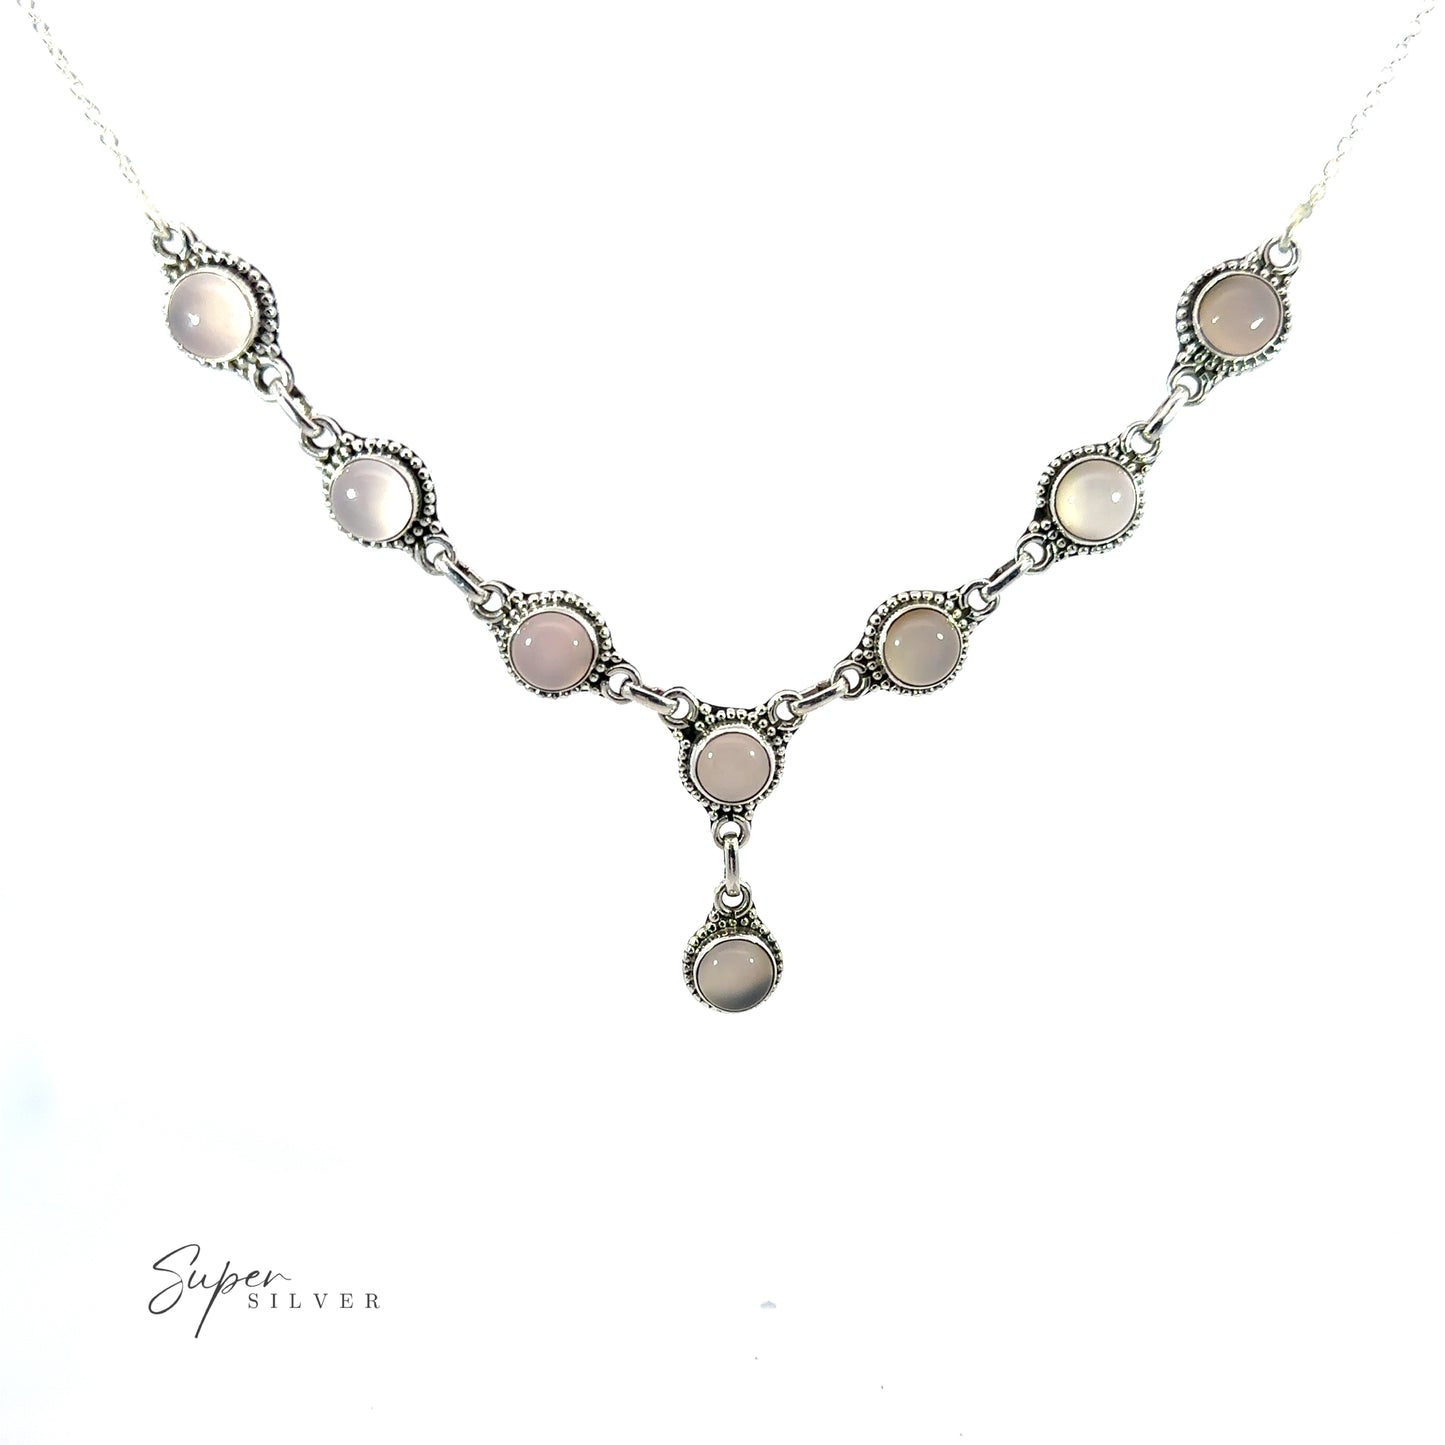 
                  
                    A Round Gemstone Y Necklace with Ball Border with eight round, light-colored stones in a linked pattern. This bohemian style jewelry piece features a single dangling stone at the center, and the text "Super Silver" is visible in the lower-left corner.
                  
                